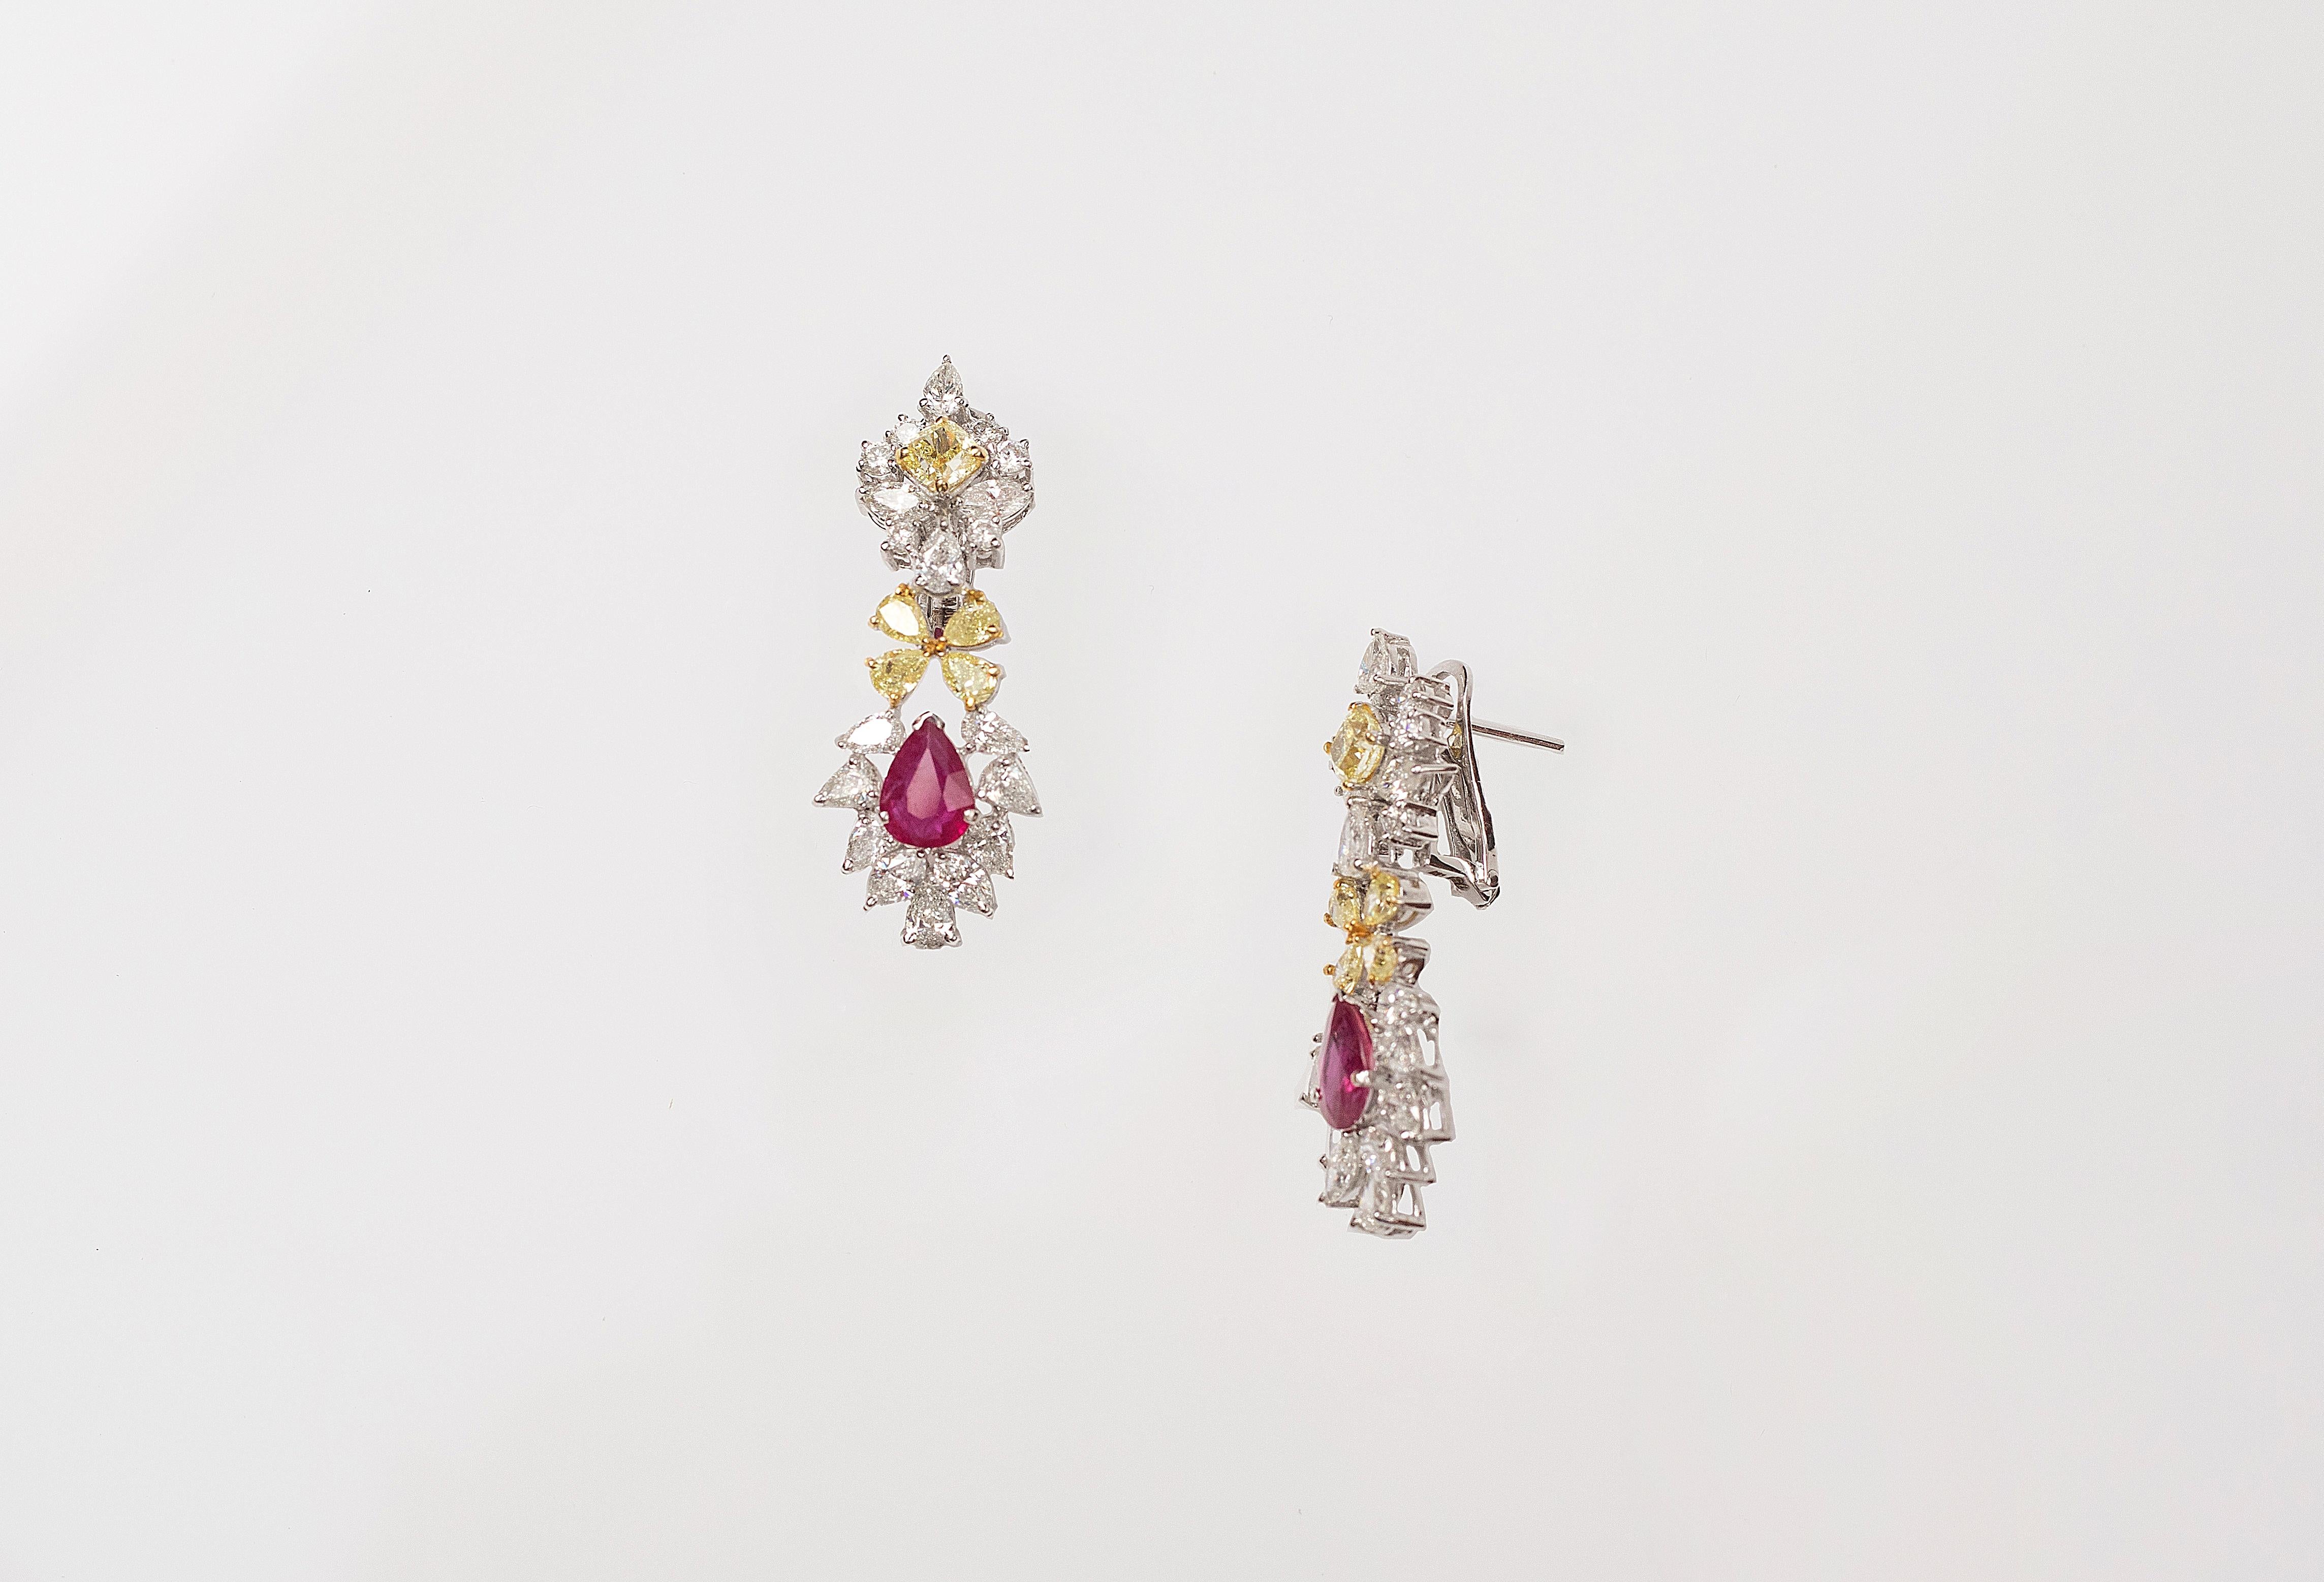 Modern 9.89 cts Fancy Yellow and White Diamonds and Natural Ruby Earrings in 18K Gold For Sale